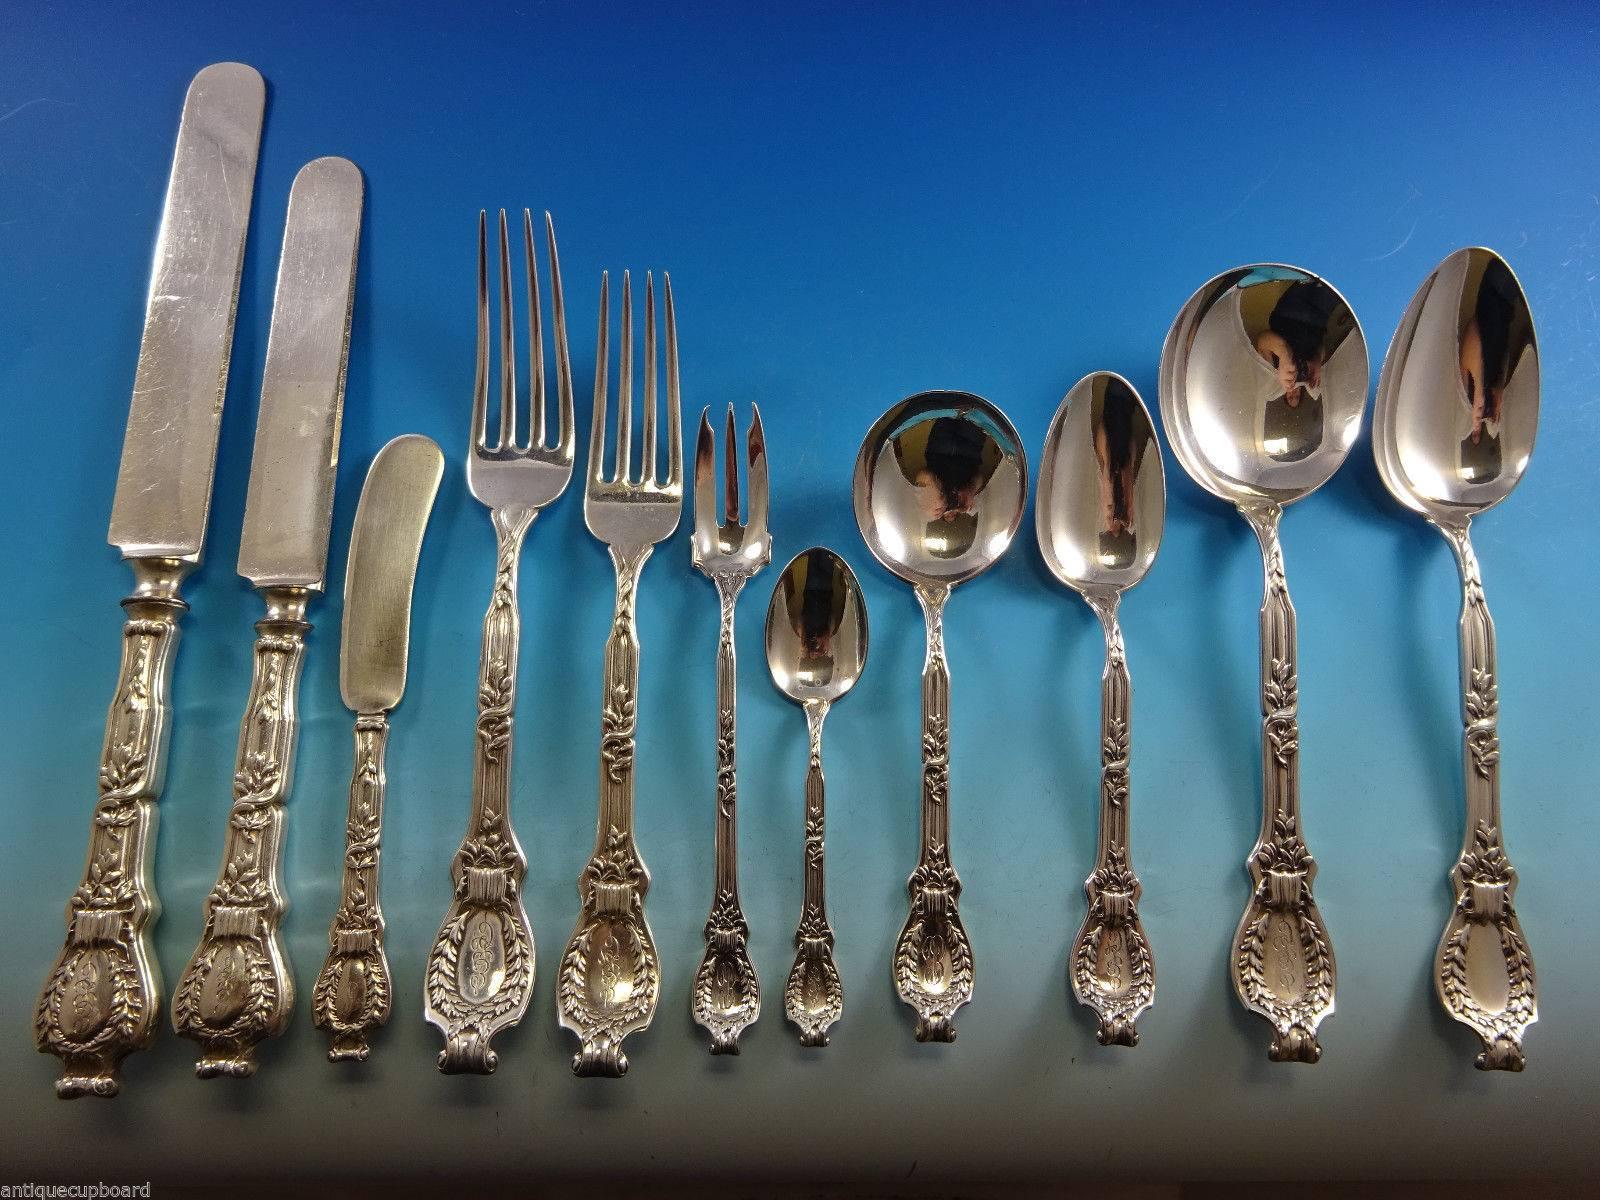 Monumental Du Barry Dubarry sterling silver flatware set of 133 pieces. This pattern was issued by Durgin in the year 1901 and features a wreath motif with elegant, shaped handle. This set includes:

12 dinner size knives, 10